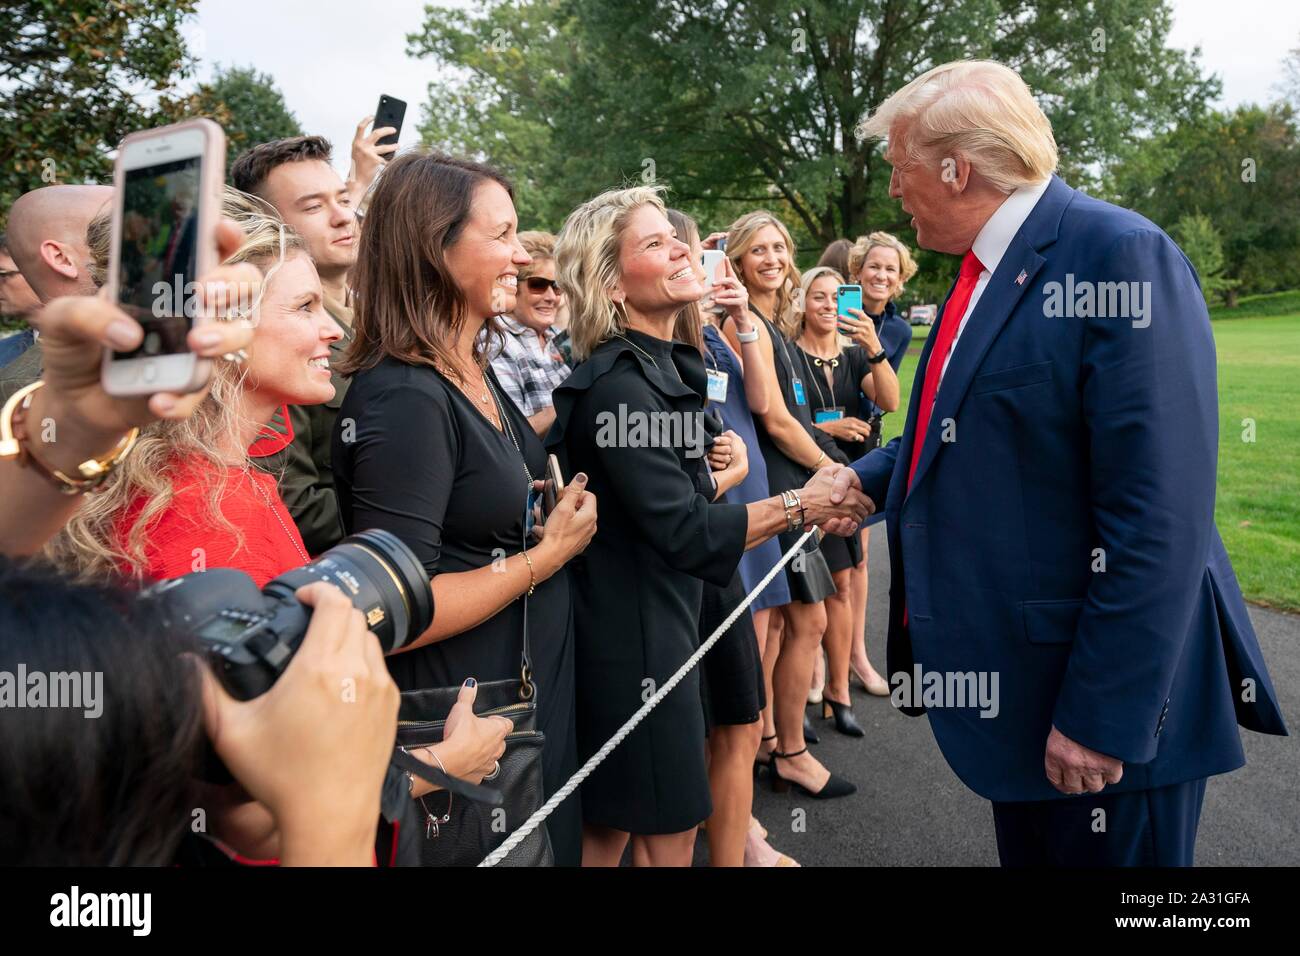 Washington, United States of America. 03 October, 2019. U.S President Donald Trump greets supporters on his return from a trip to Central Florida on the South Lawn of the White House October 3, 2019 in Washington, DC. Credit: Tia Dufour/White House Photo/Alamy Live News Stock Photo